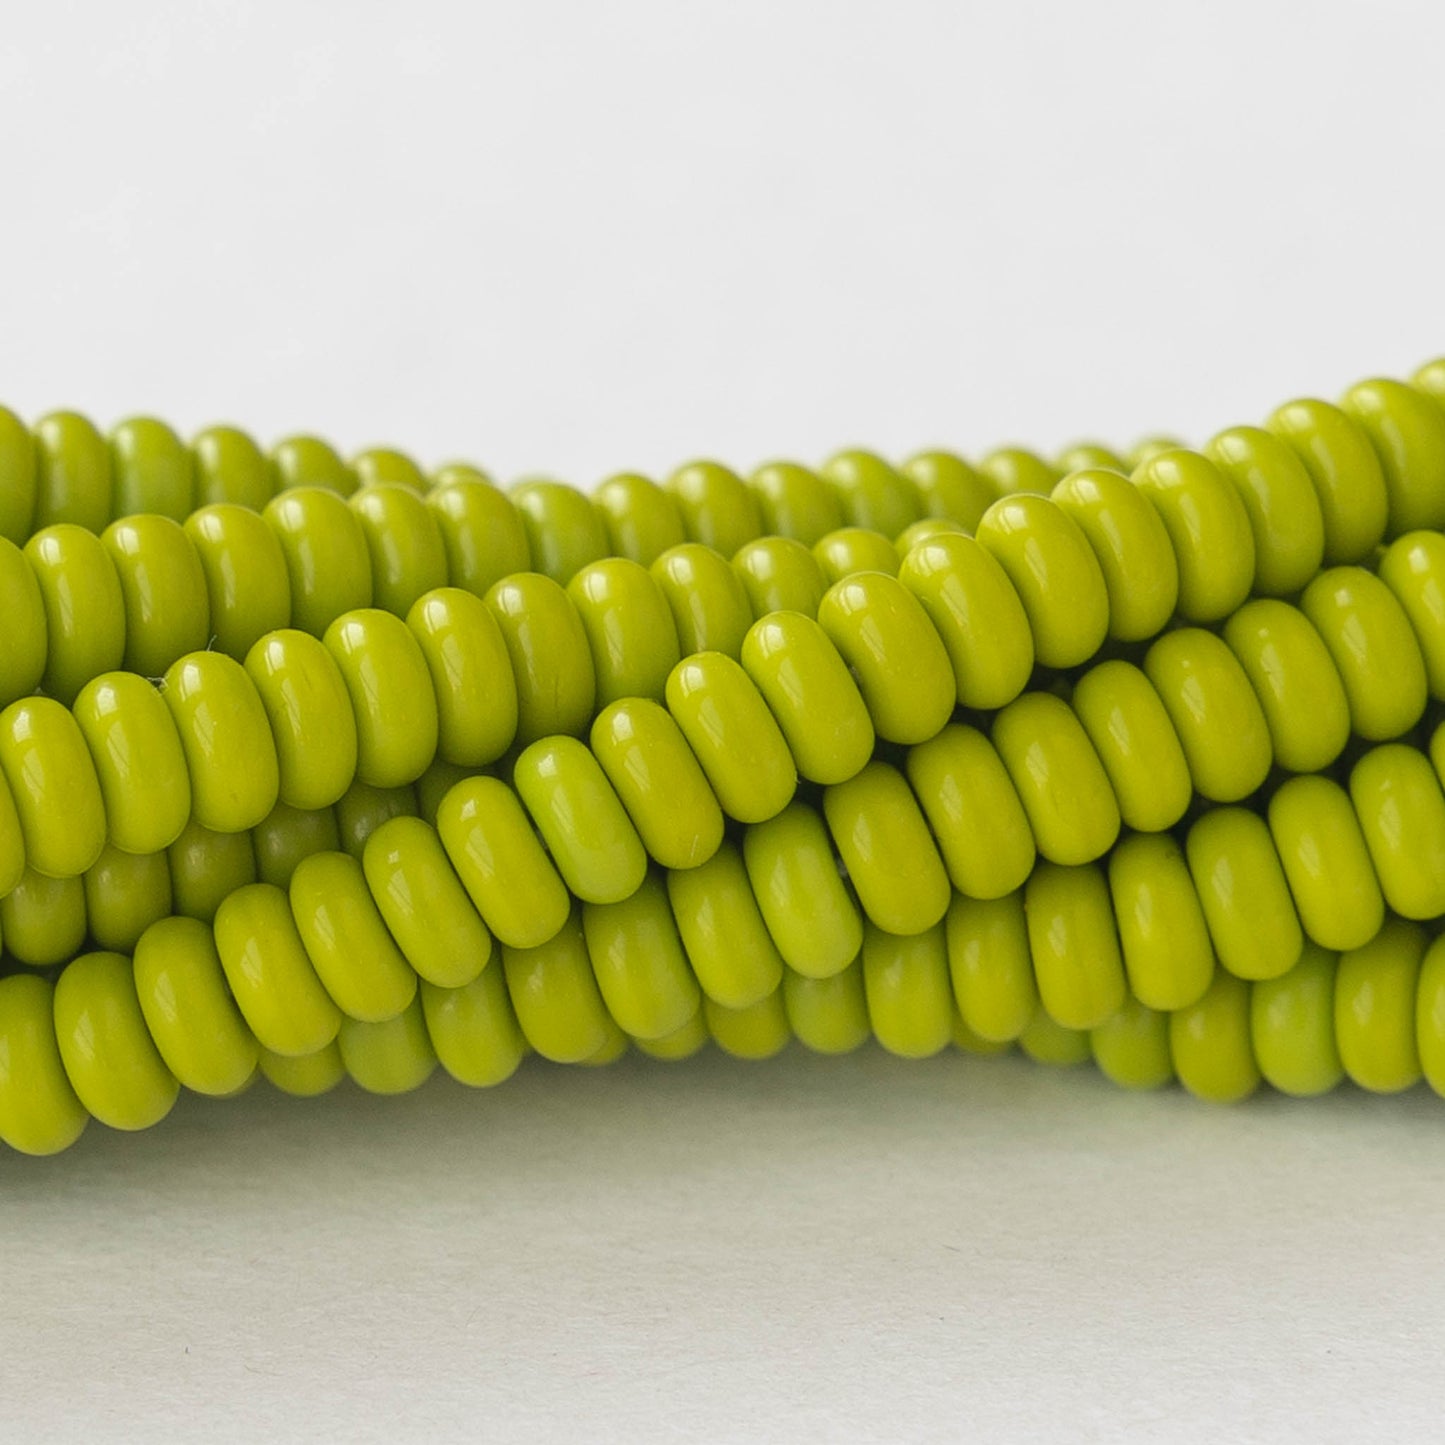 4mm Rondelle Beads - Opaque Light Lime Green - 100 Beads